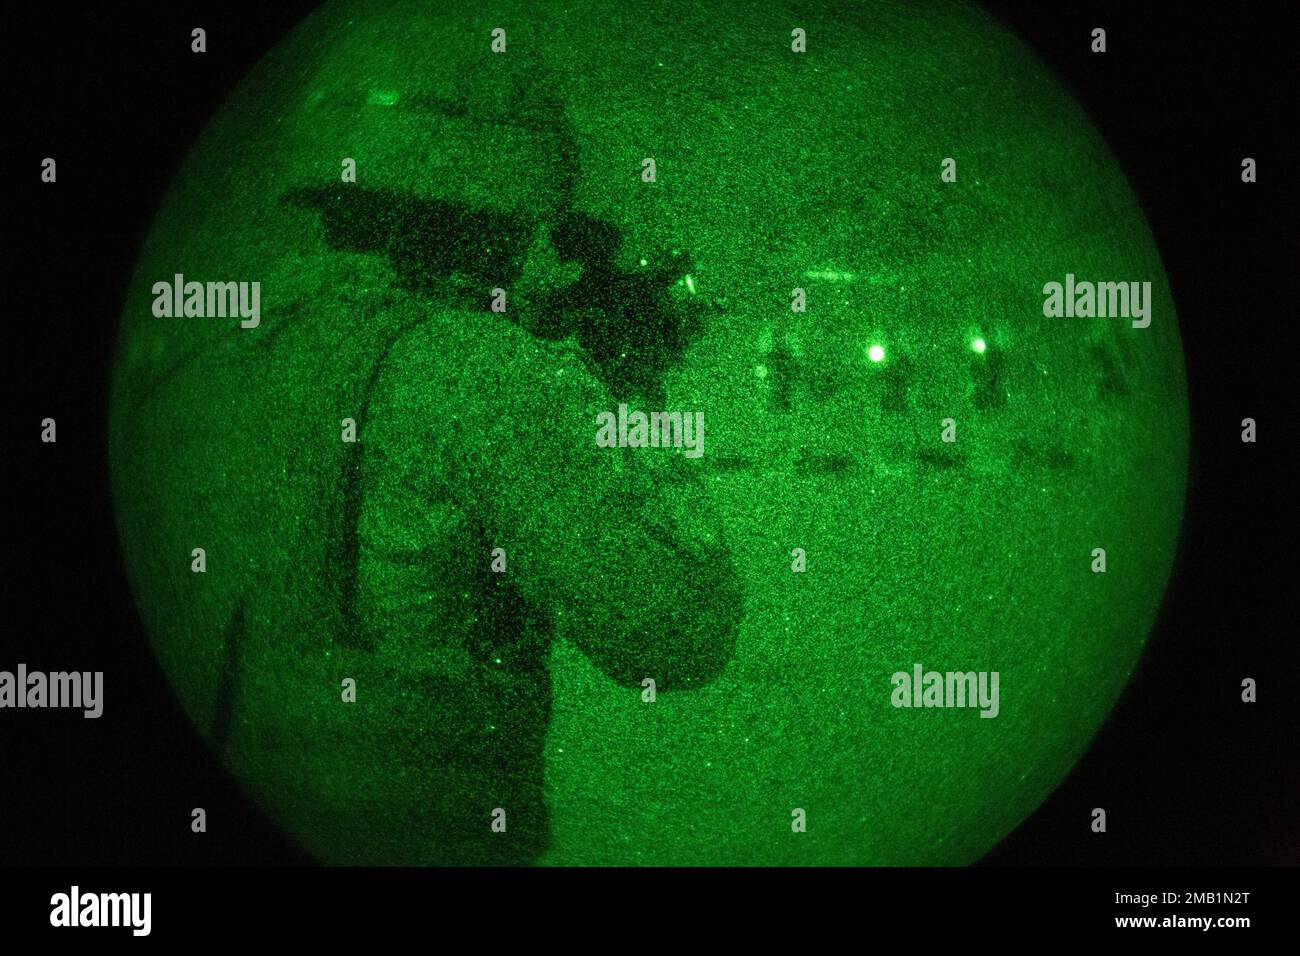 A U.S. Marine with the 13th Marine Expeditionary Unit, uses a PVS-14 Night Vision Monocular device to locate and fire at targets for rifle qualification tables 3-6 during Realistic Urban Training exercise at Marine Corp Air Ground Combat Center Twentynine Palms on June 9, 2022. The 13th MEU is currently conducting RUT exercise to enhance the integration and collective capability of the MEU’s command, air, ground, and logistics elements and prepare the 13th MEU to meet the nation’s crisis response needs during their upcoming overseas deployment. Stock Photo